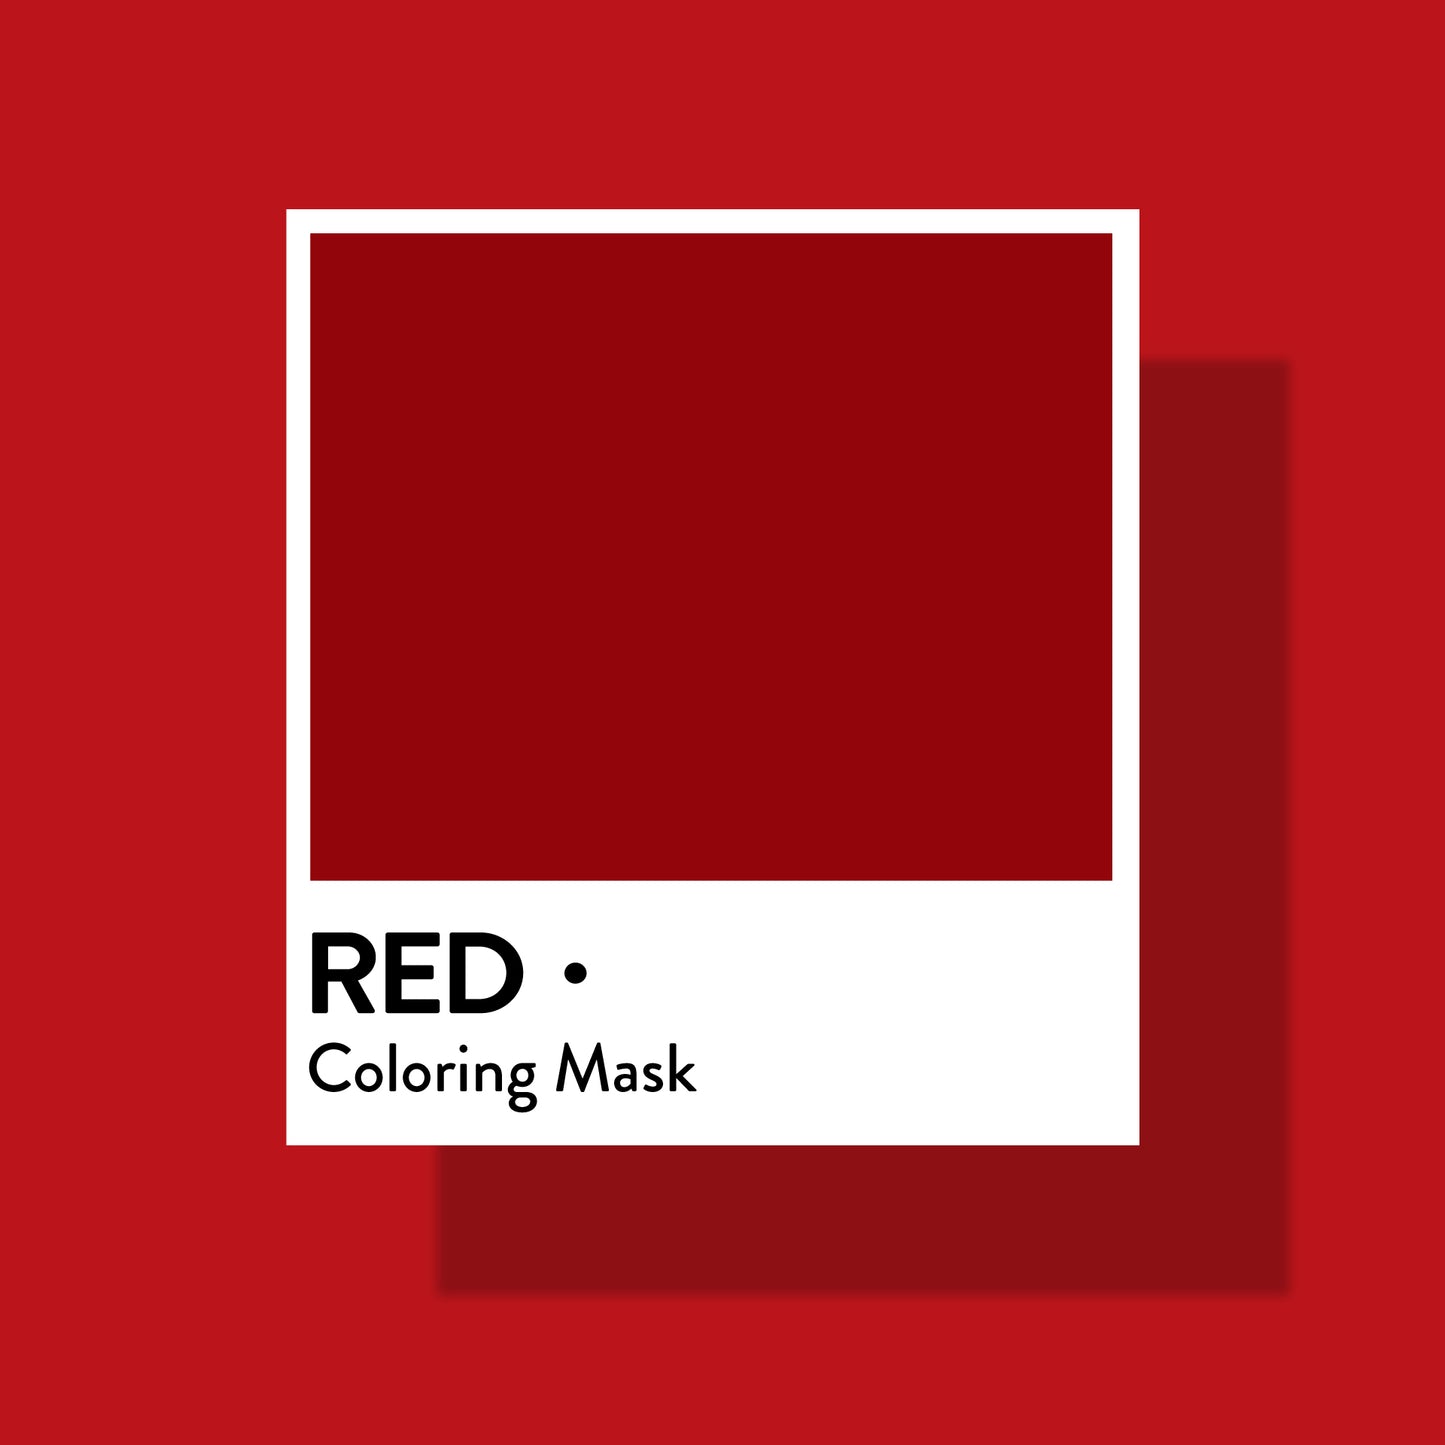 RETAIL COLOREFRESH RED COLORING MASK